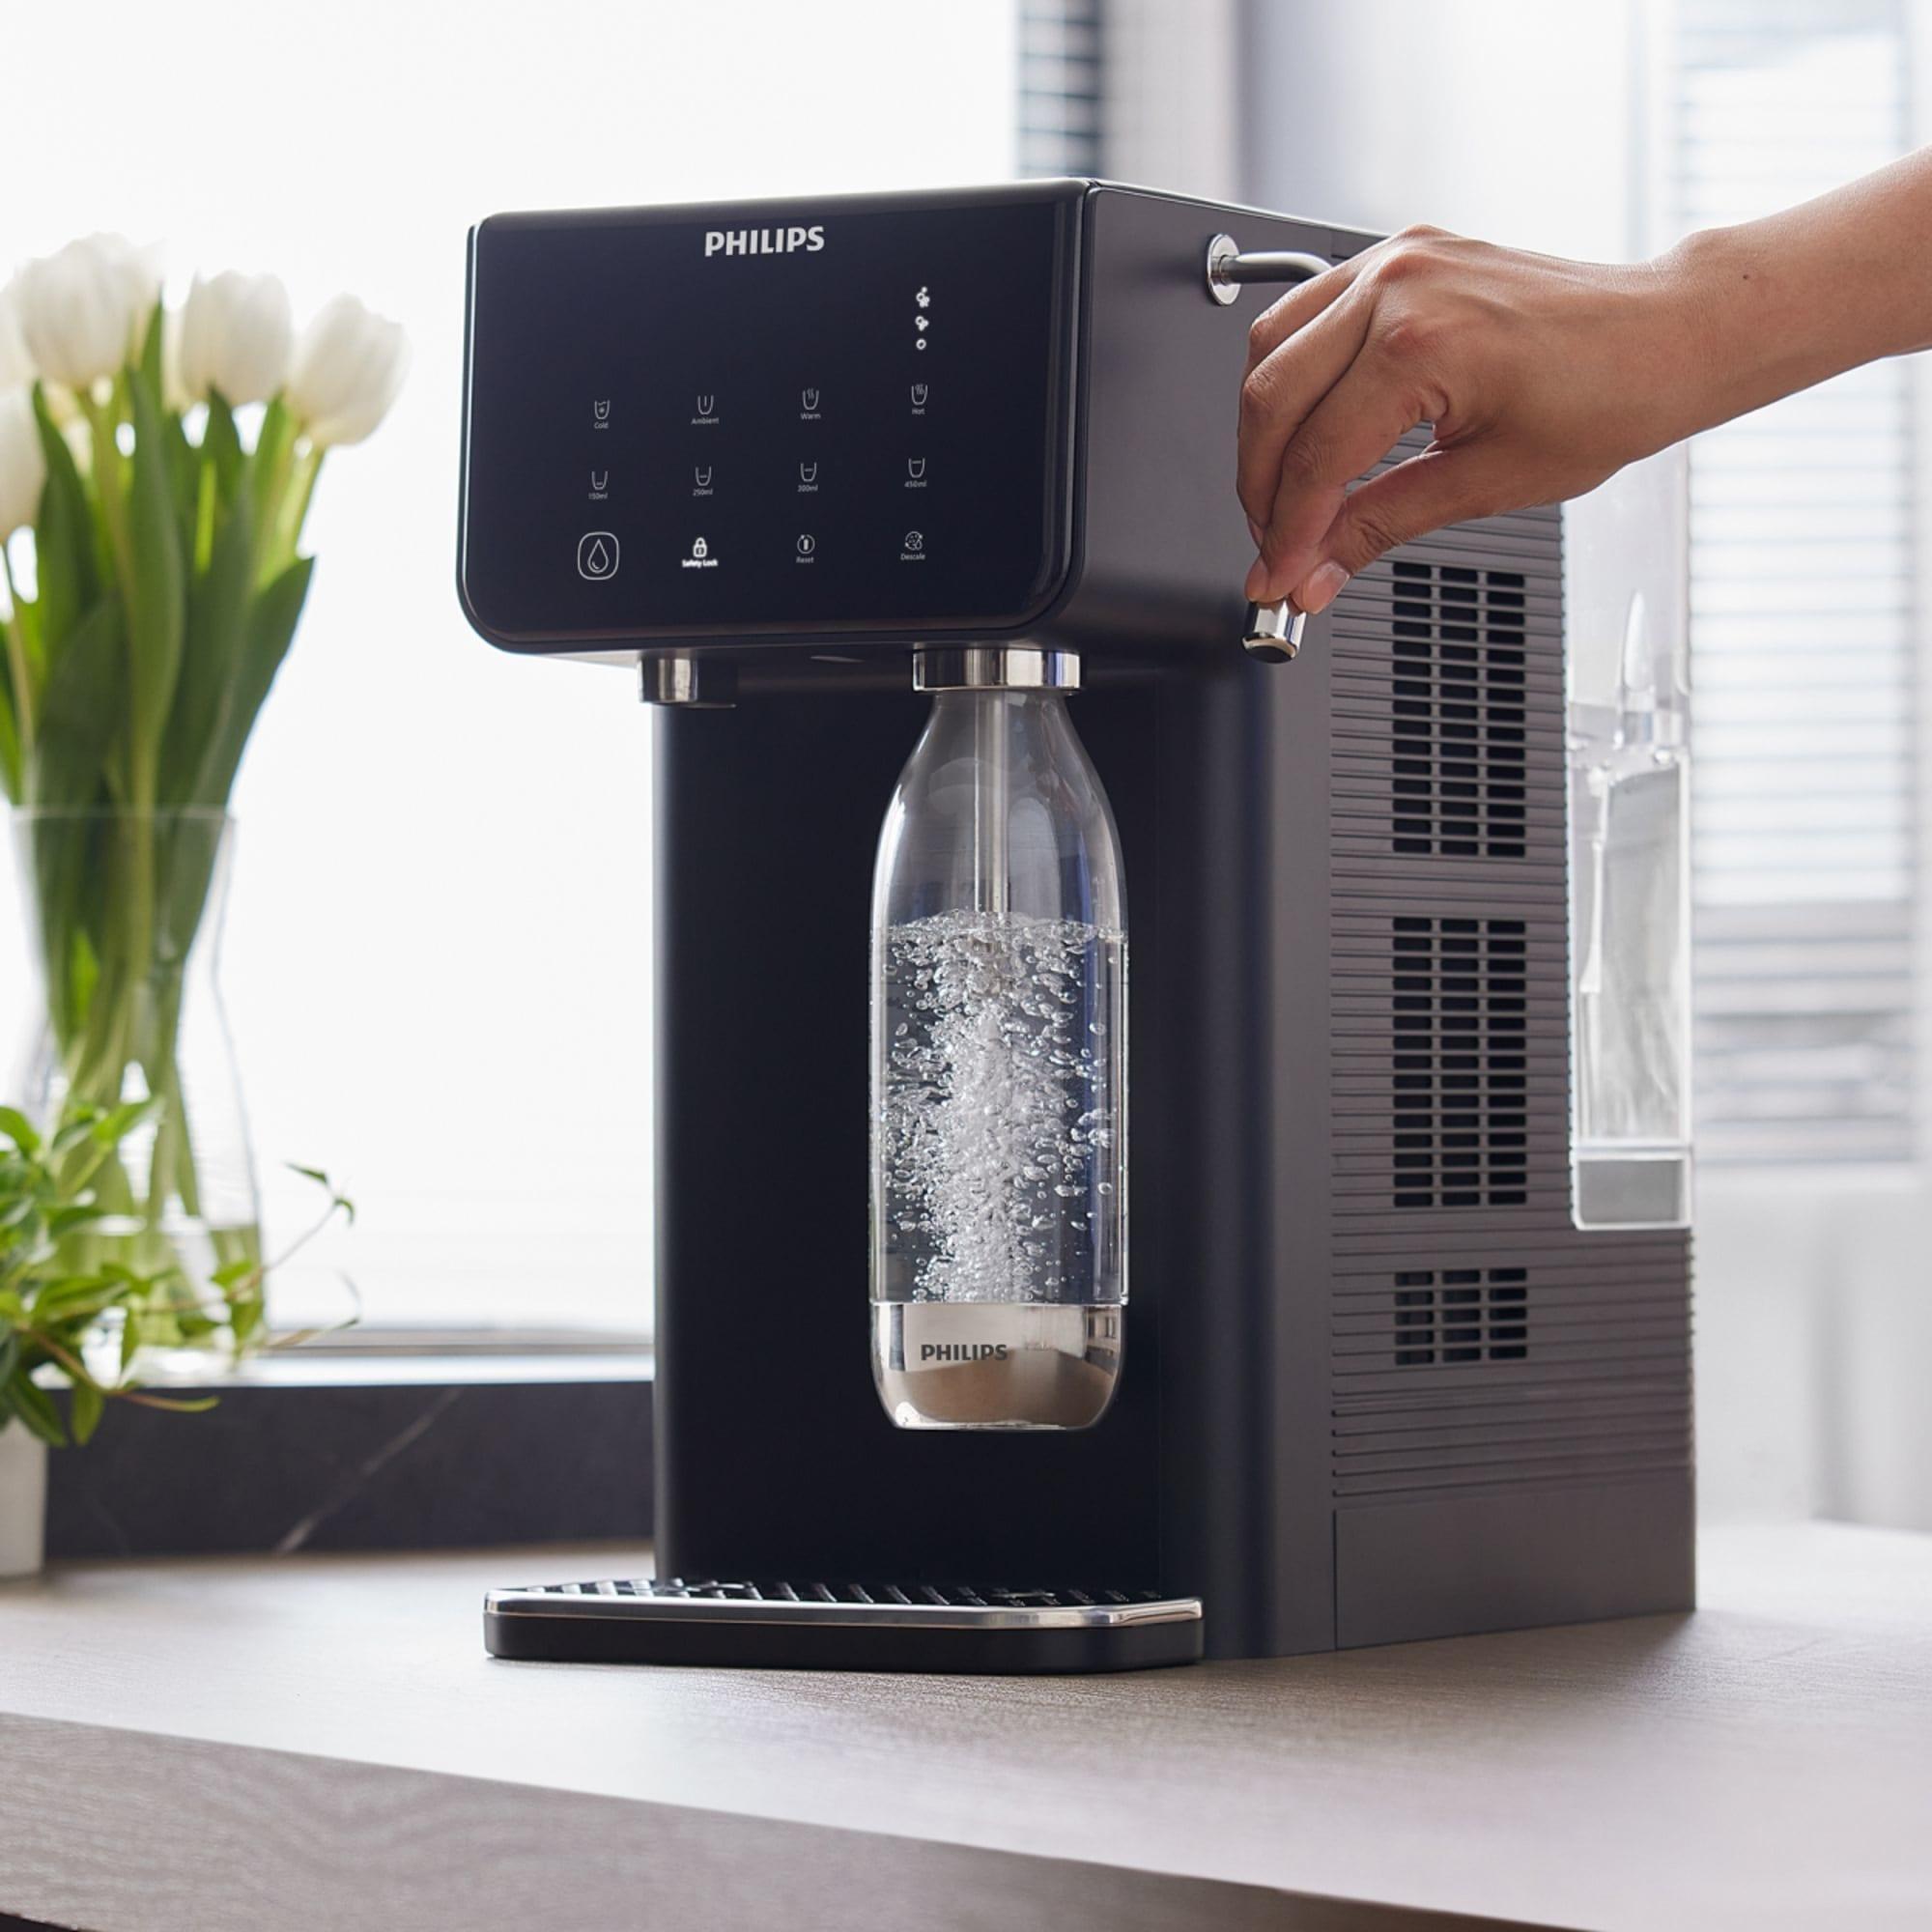 Philips Hot and Cold Sparkling Water Station with Micro X Clean Filtration 3.8L Image 6